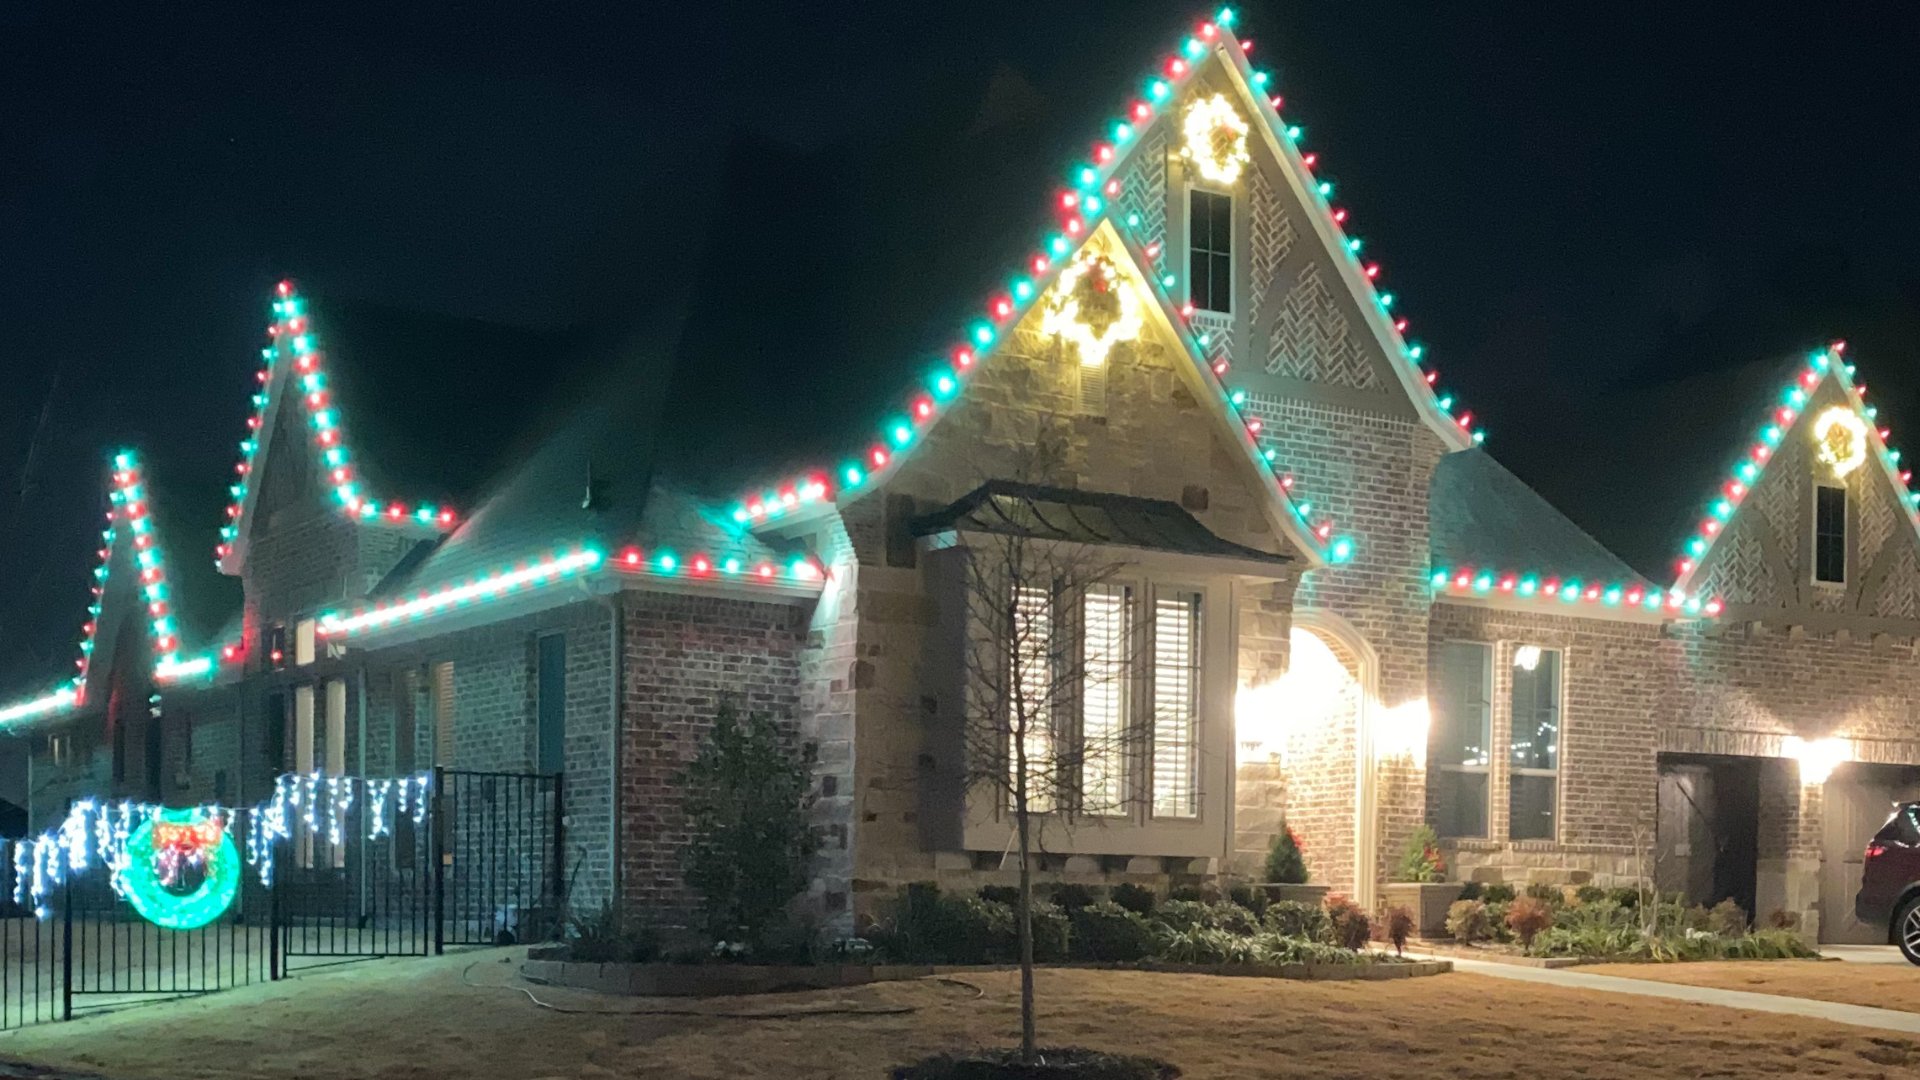 Signing Up for a Professional Holiday Lighting Service Is Worth It!